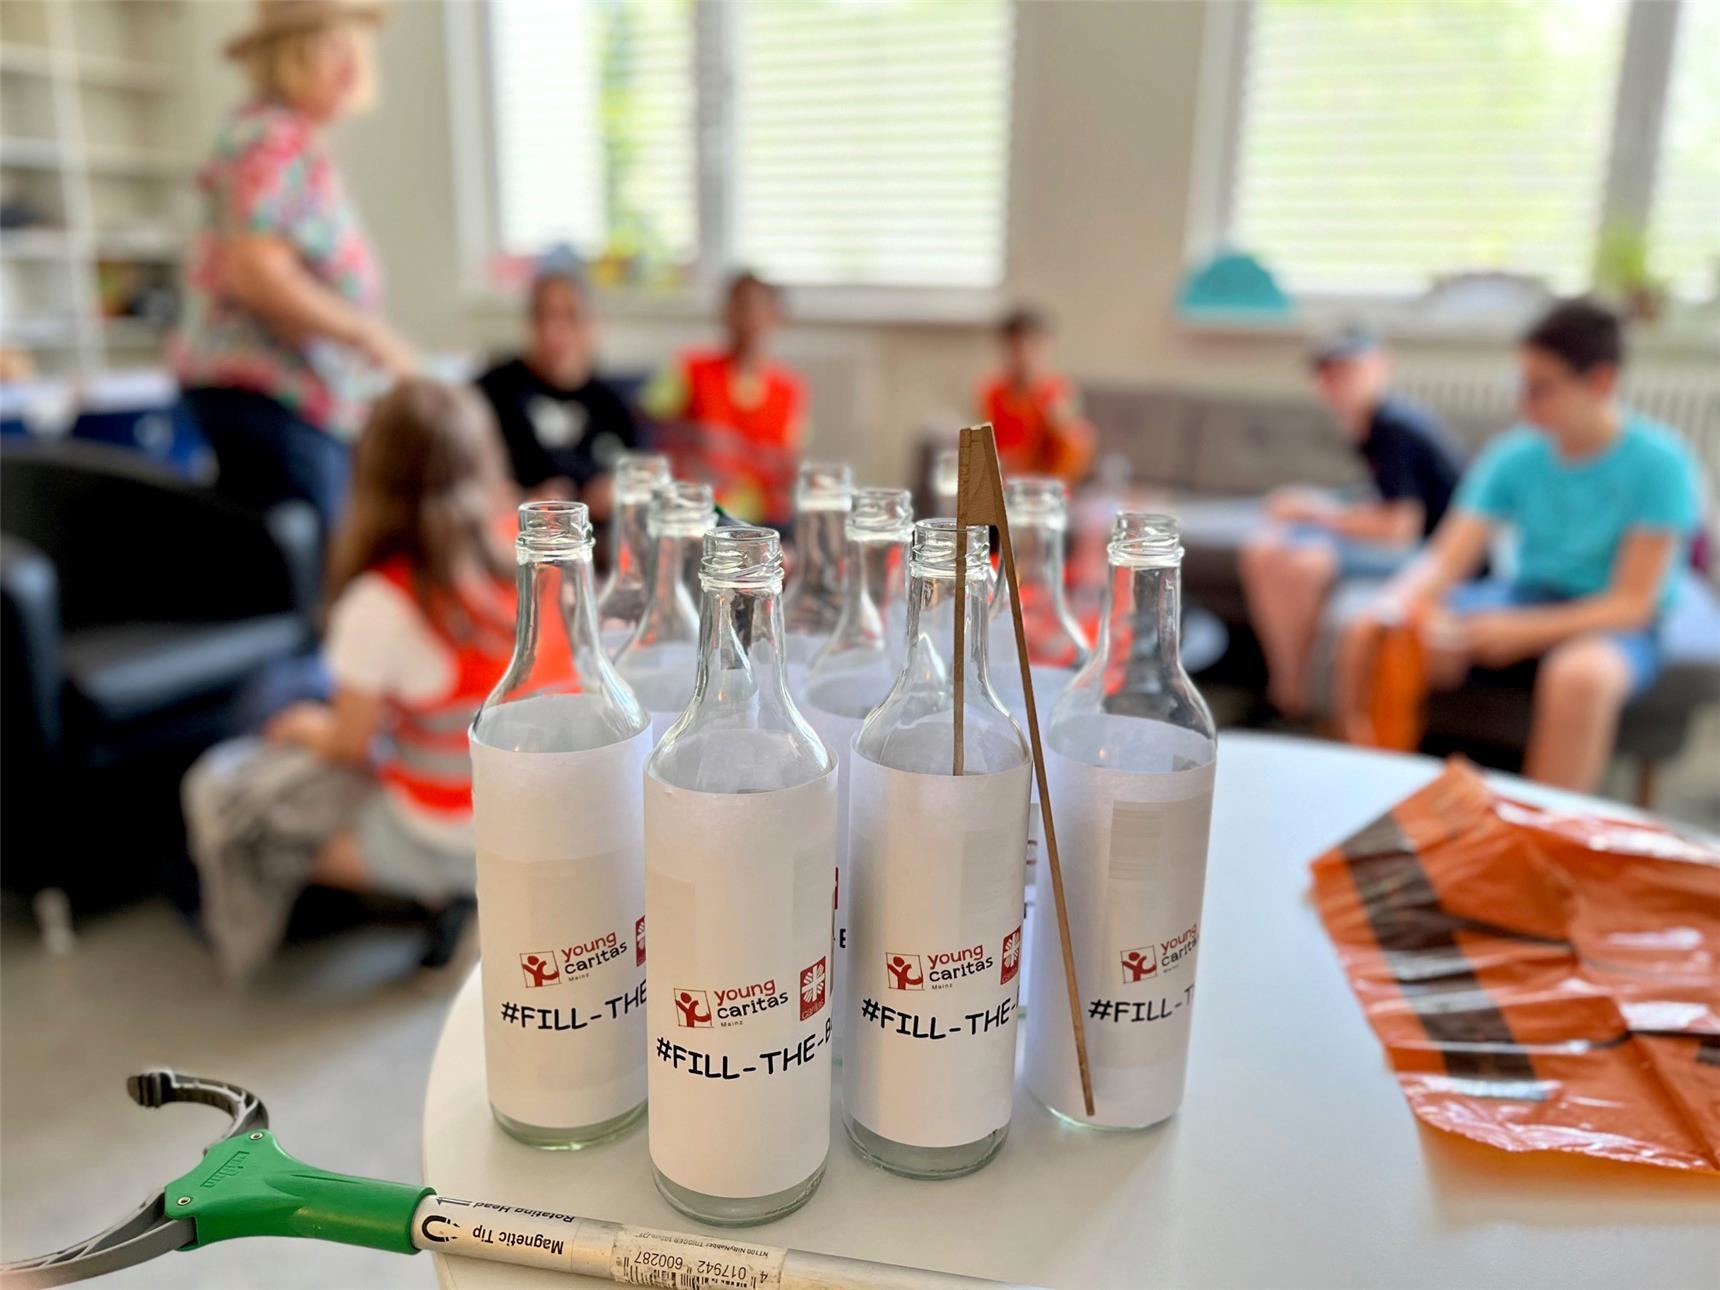 Fill the bottle challenge youngcaritas in der Schule